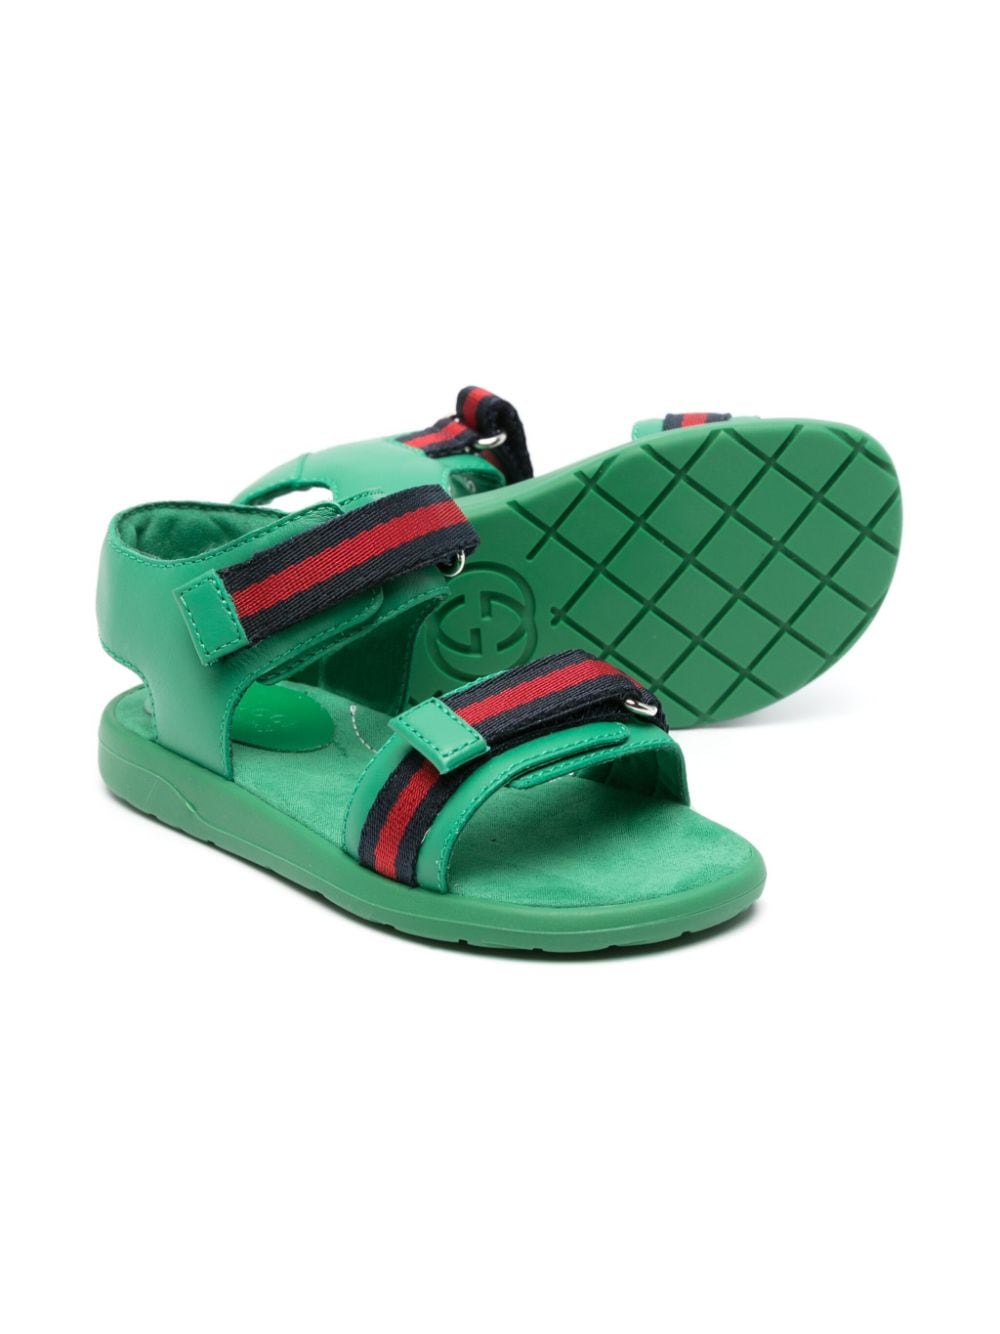 Green sandals for girls with logo